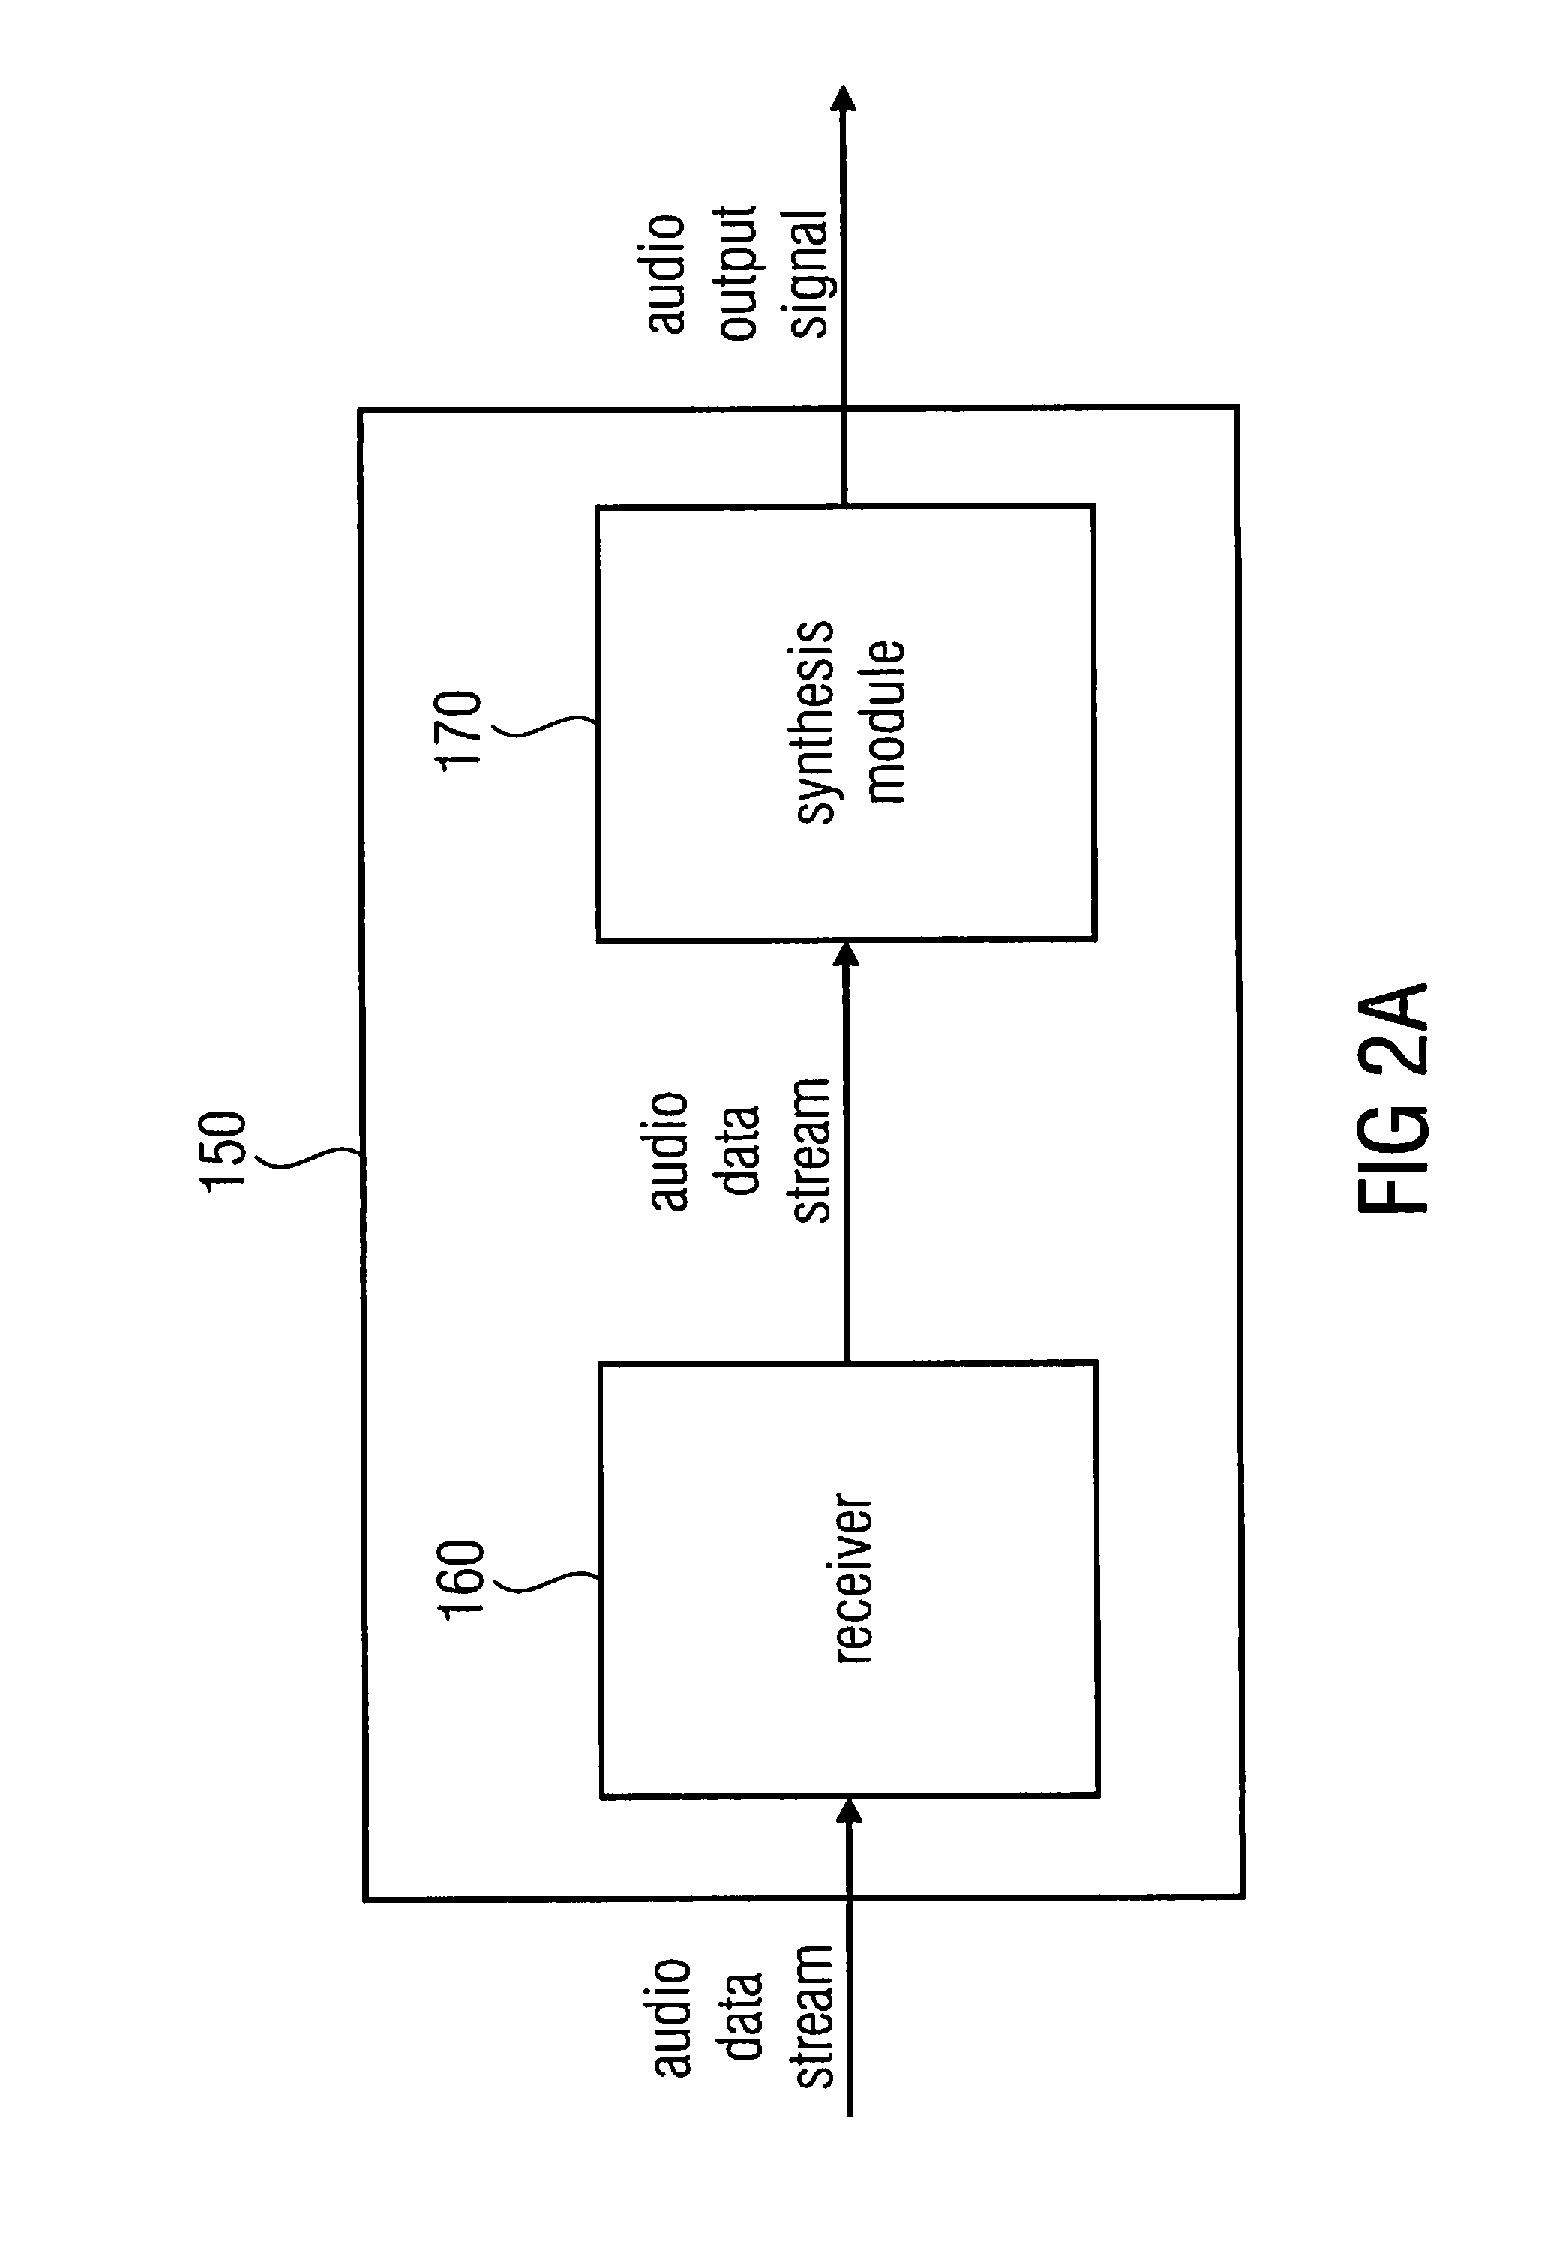 Apparatus and method for merging geometry-based spatial audio coding streams